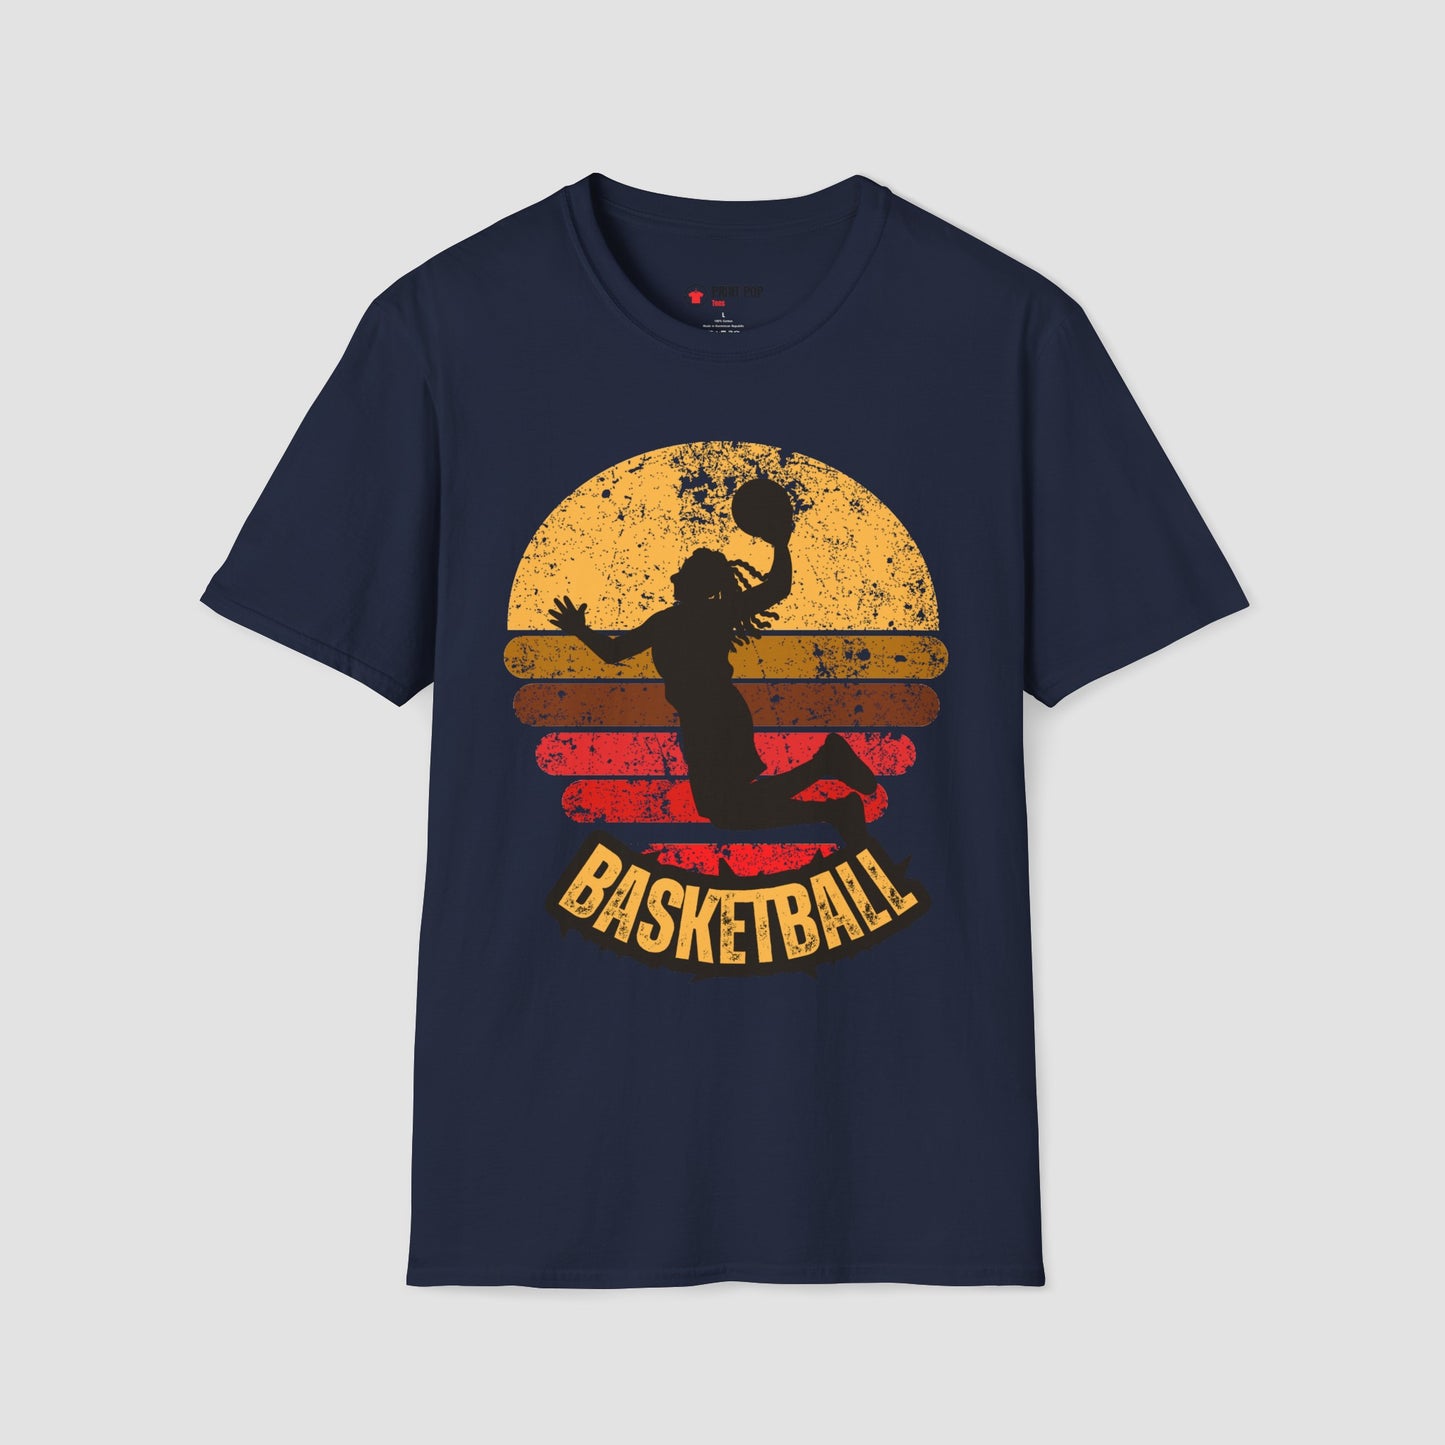 Basketball Unique Printed Tee